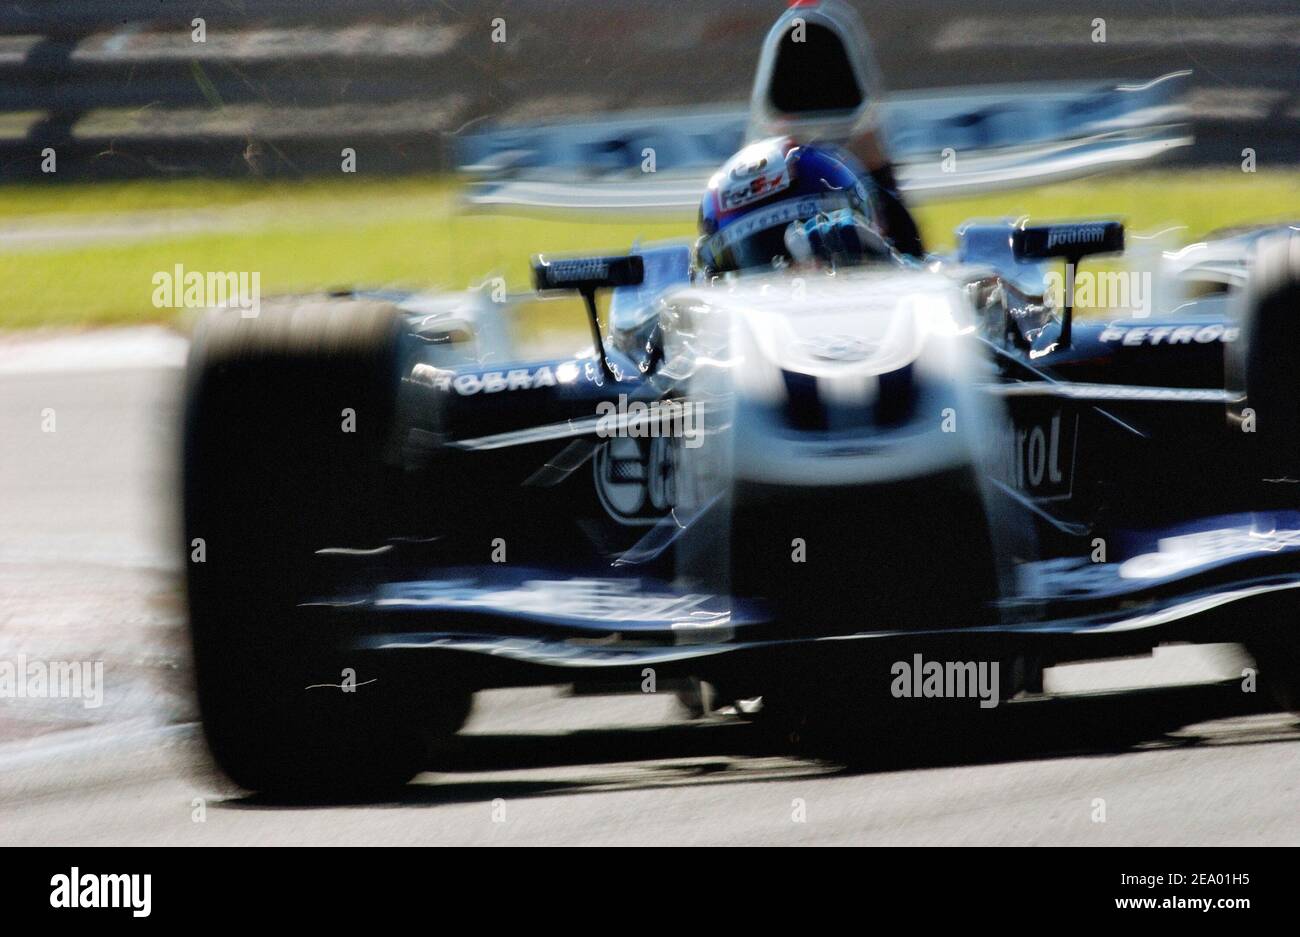 Colombian Formula 1 driver Juan Pablo Montoya (Williams team) during the formula 1 Grand Prix in Monza, Italy, on September 12, 2004. Photo by Thierry Gromik/ABACA. Stock Photo